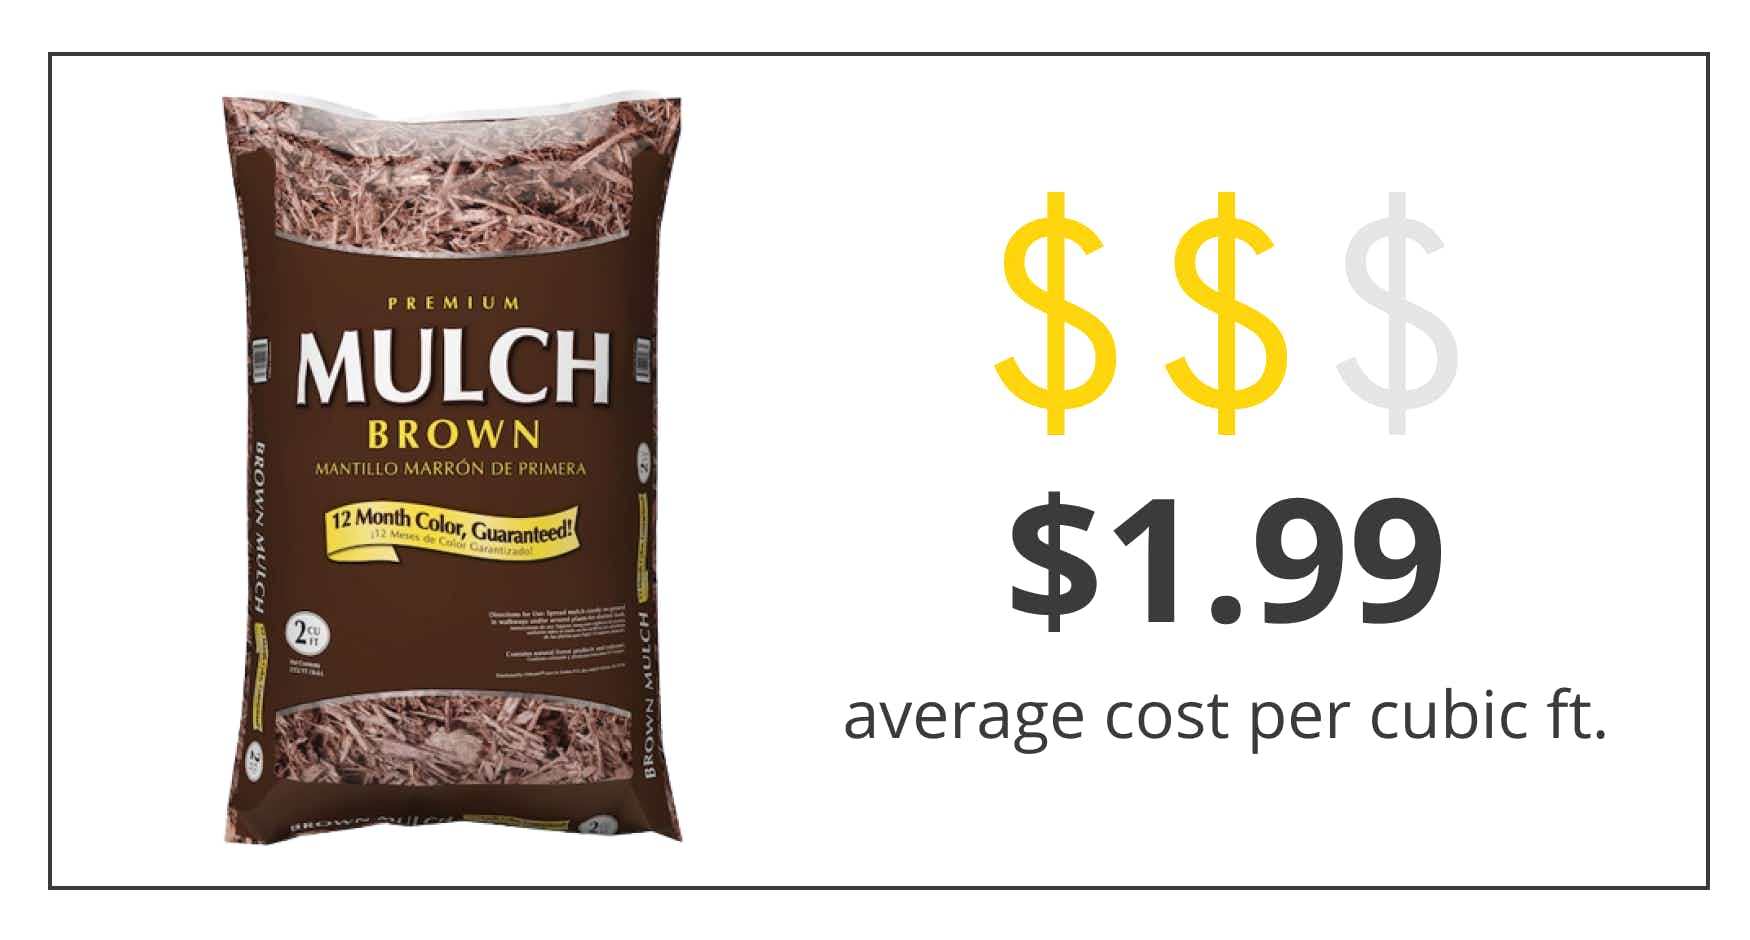 a graphic showing the average cost of a bag of lowe's mulch is $1.99 per cubic square foot